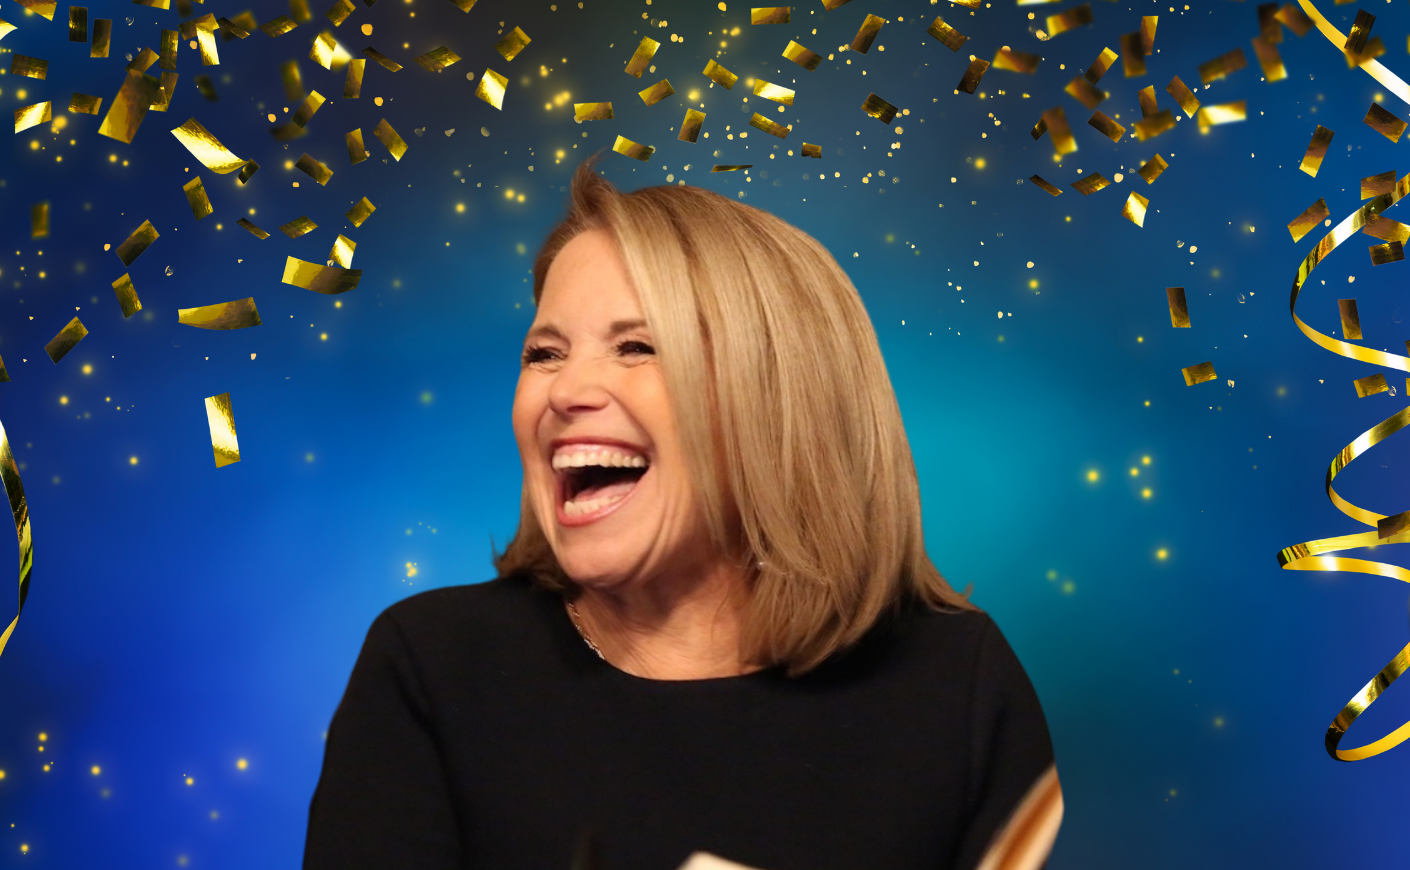 katie couric with confetti behind her